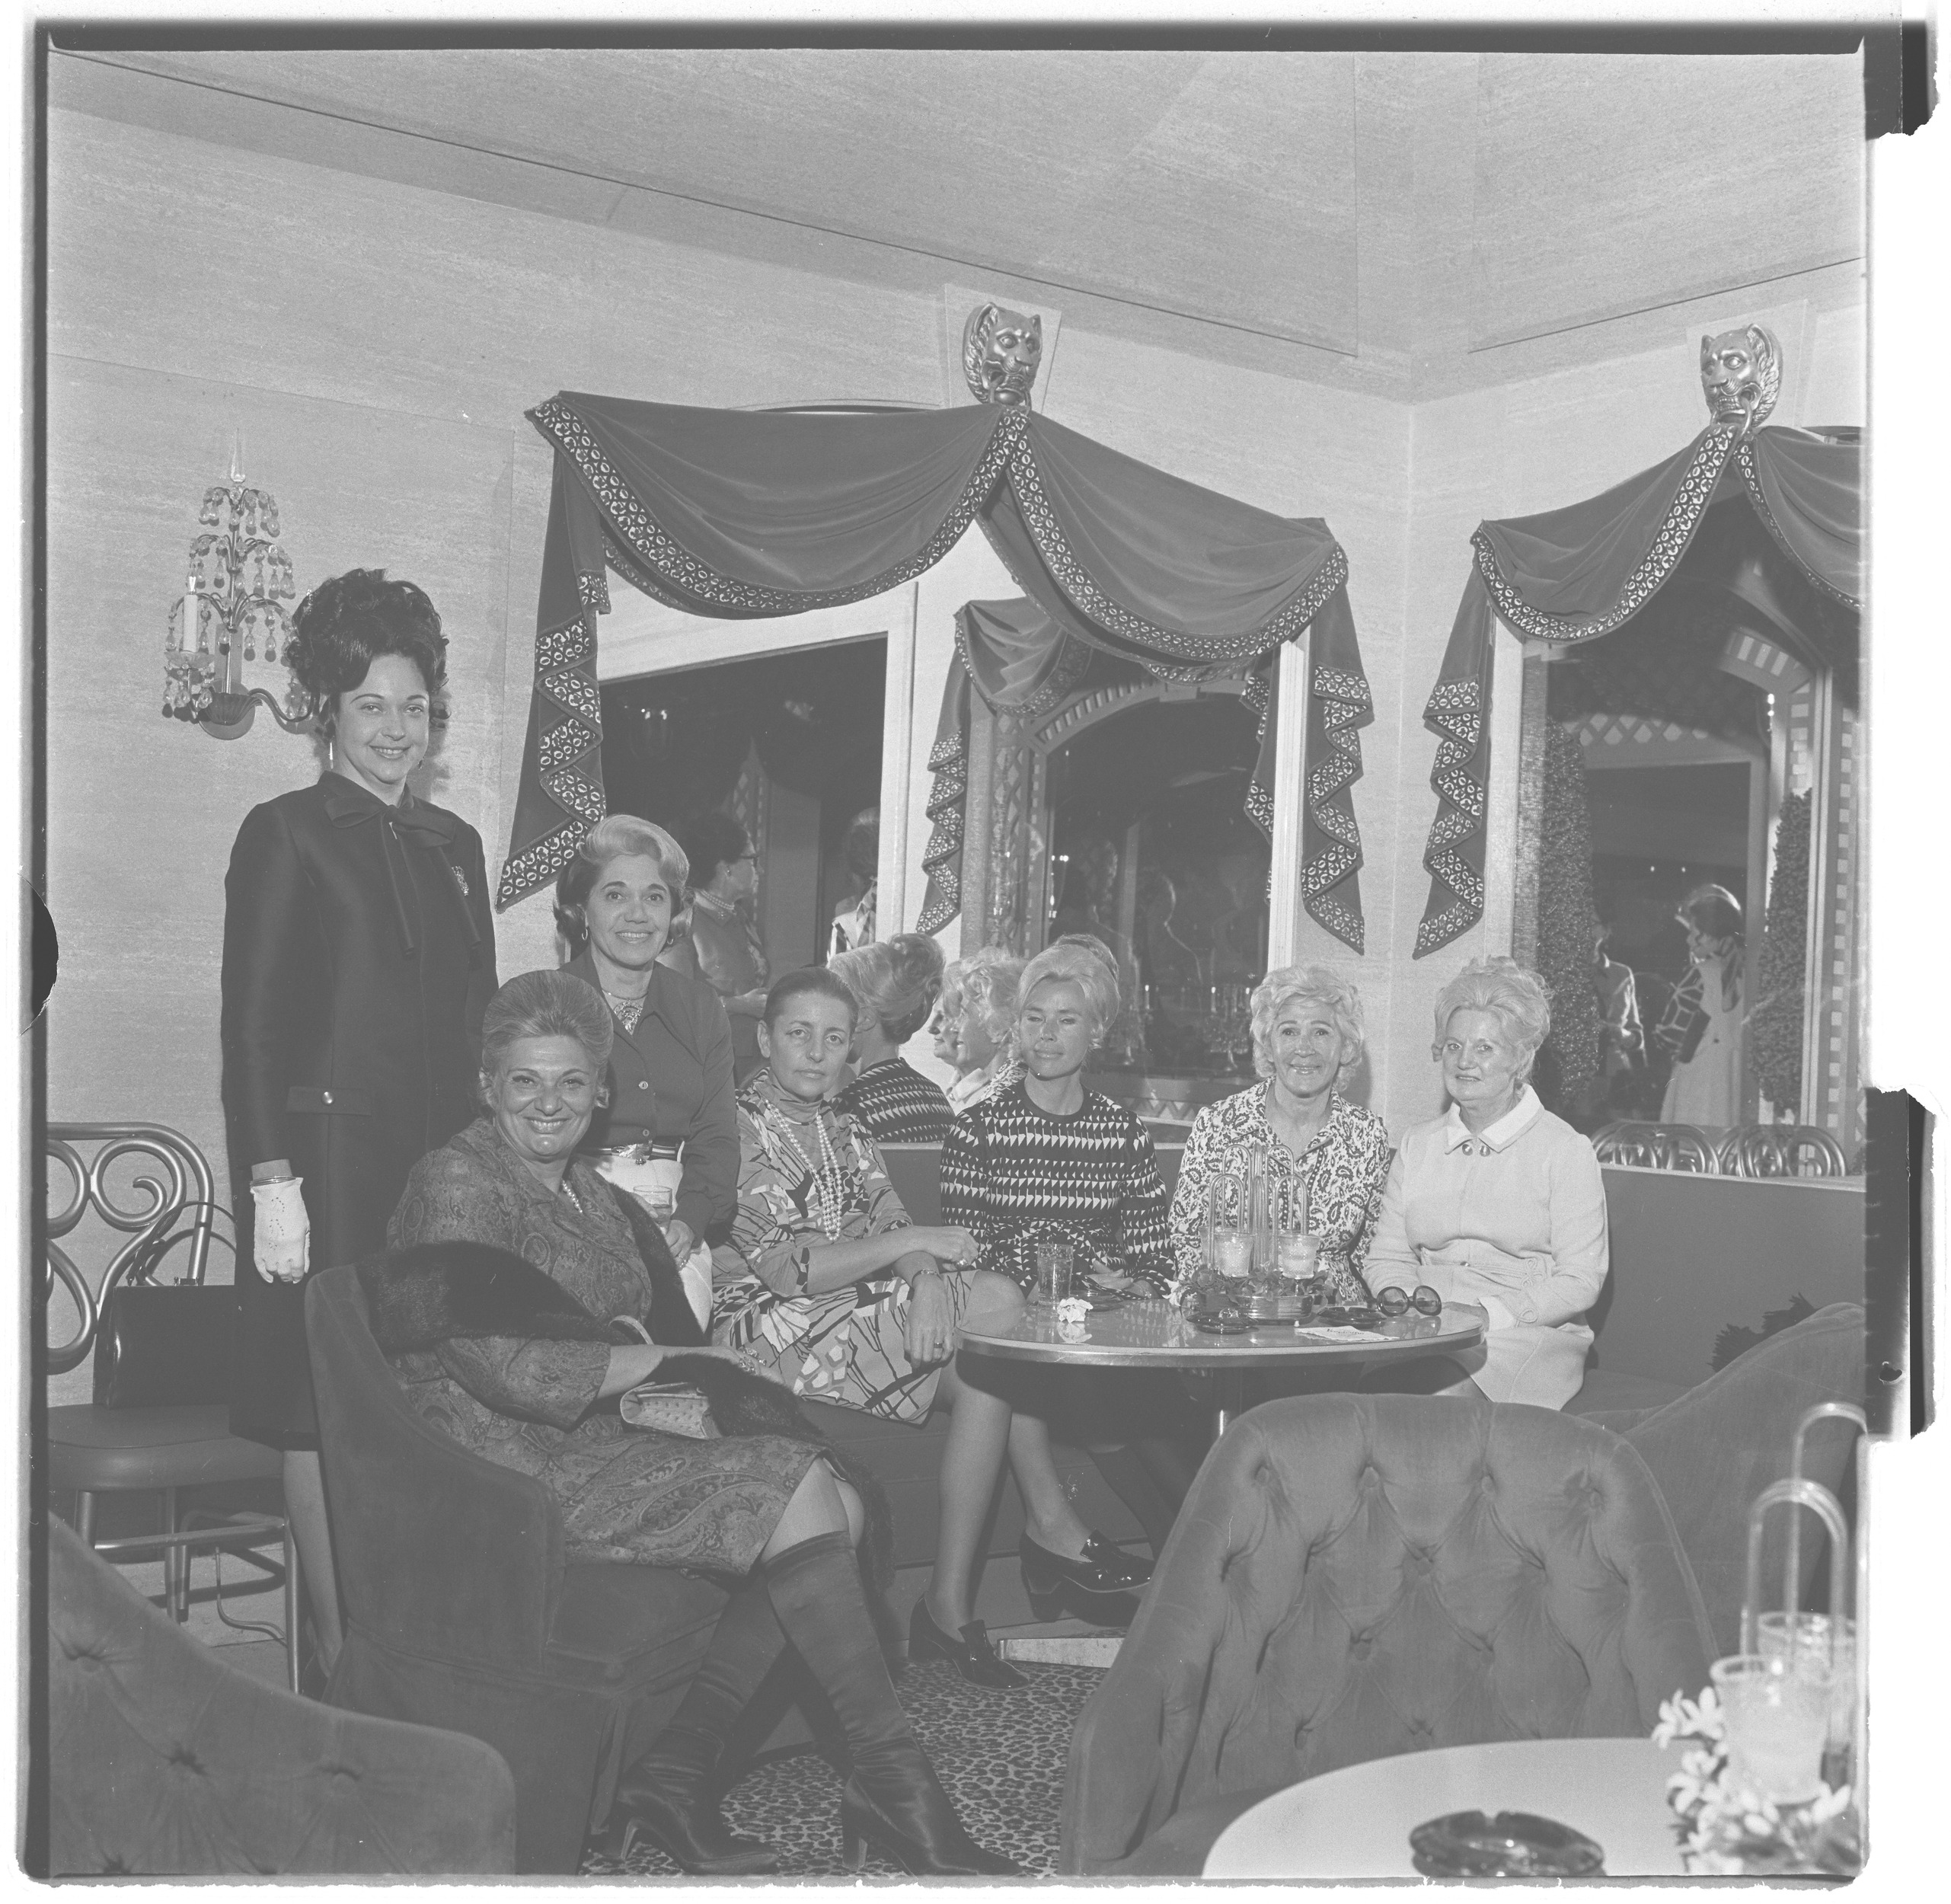 Photographs of Combined Jewish Appeal (Tropicana Hotel Gourmet RM), image 06